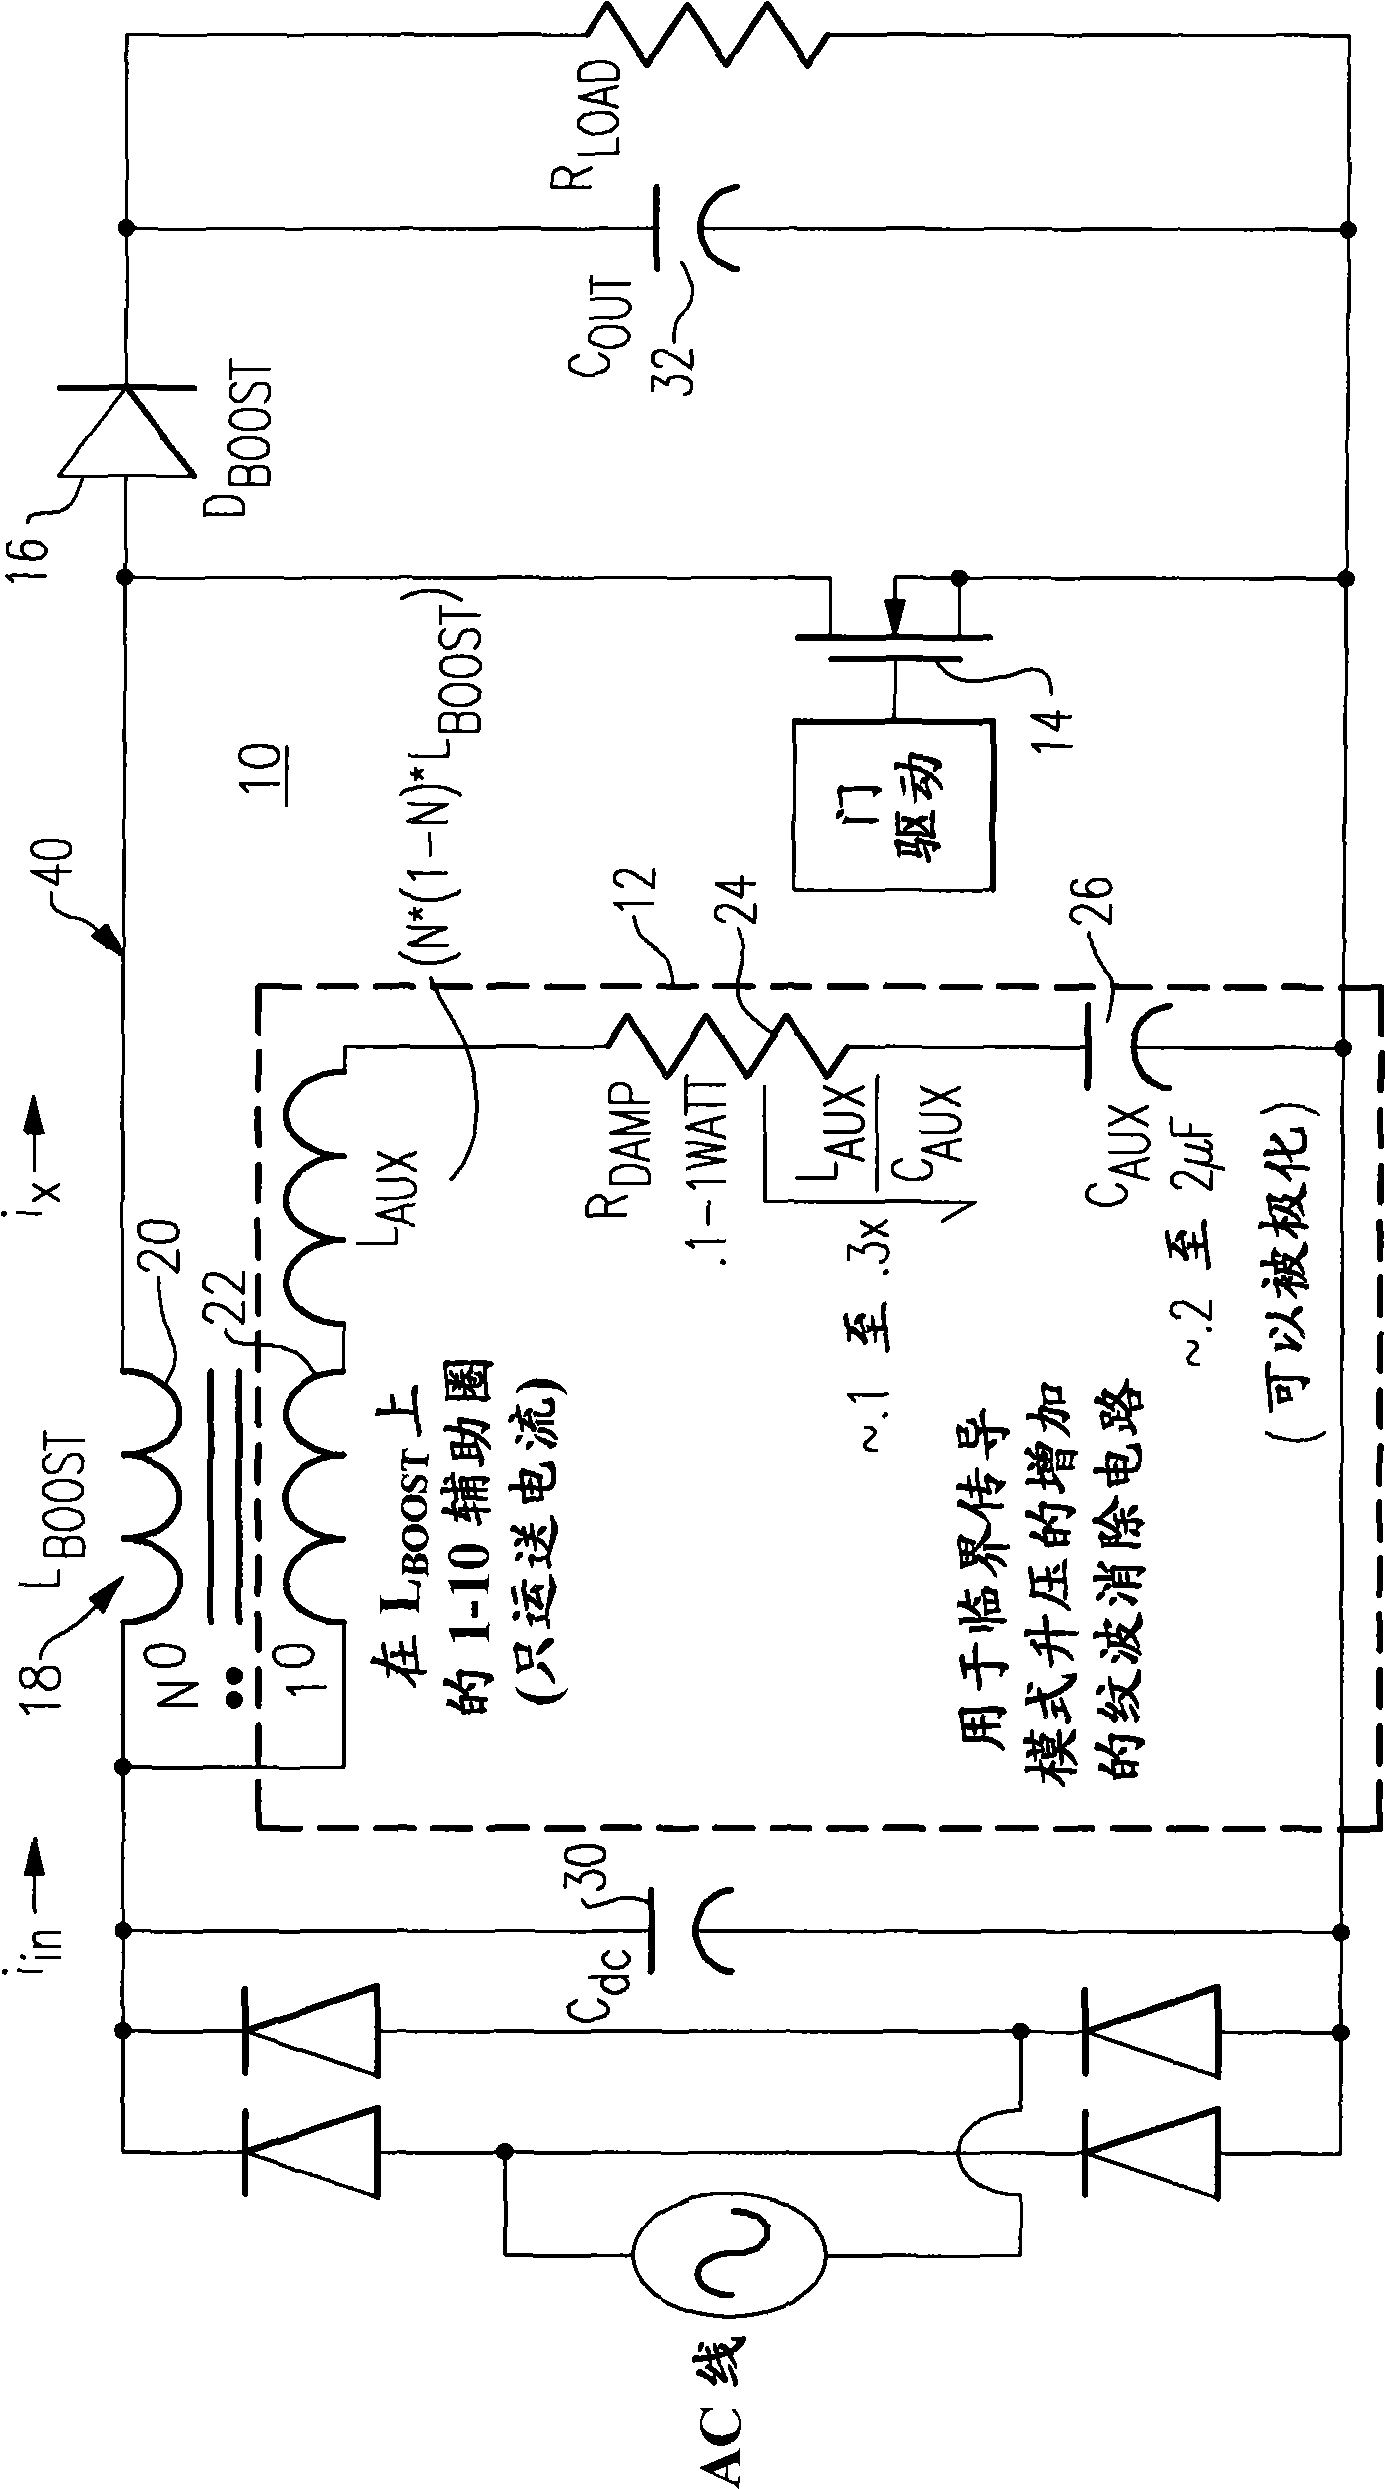 Boost converter input ripple current reduction circuit